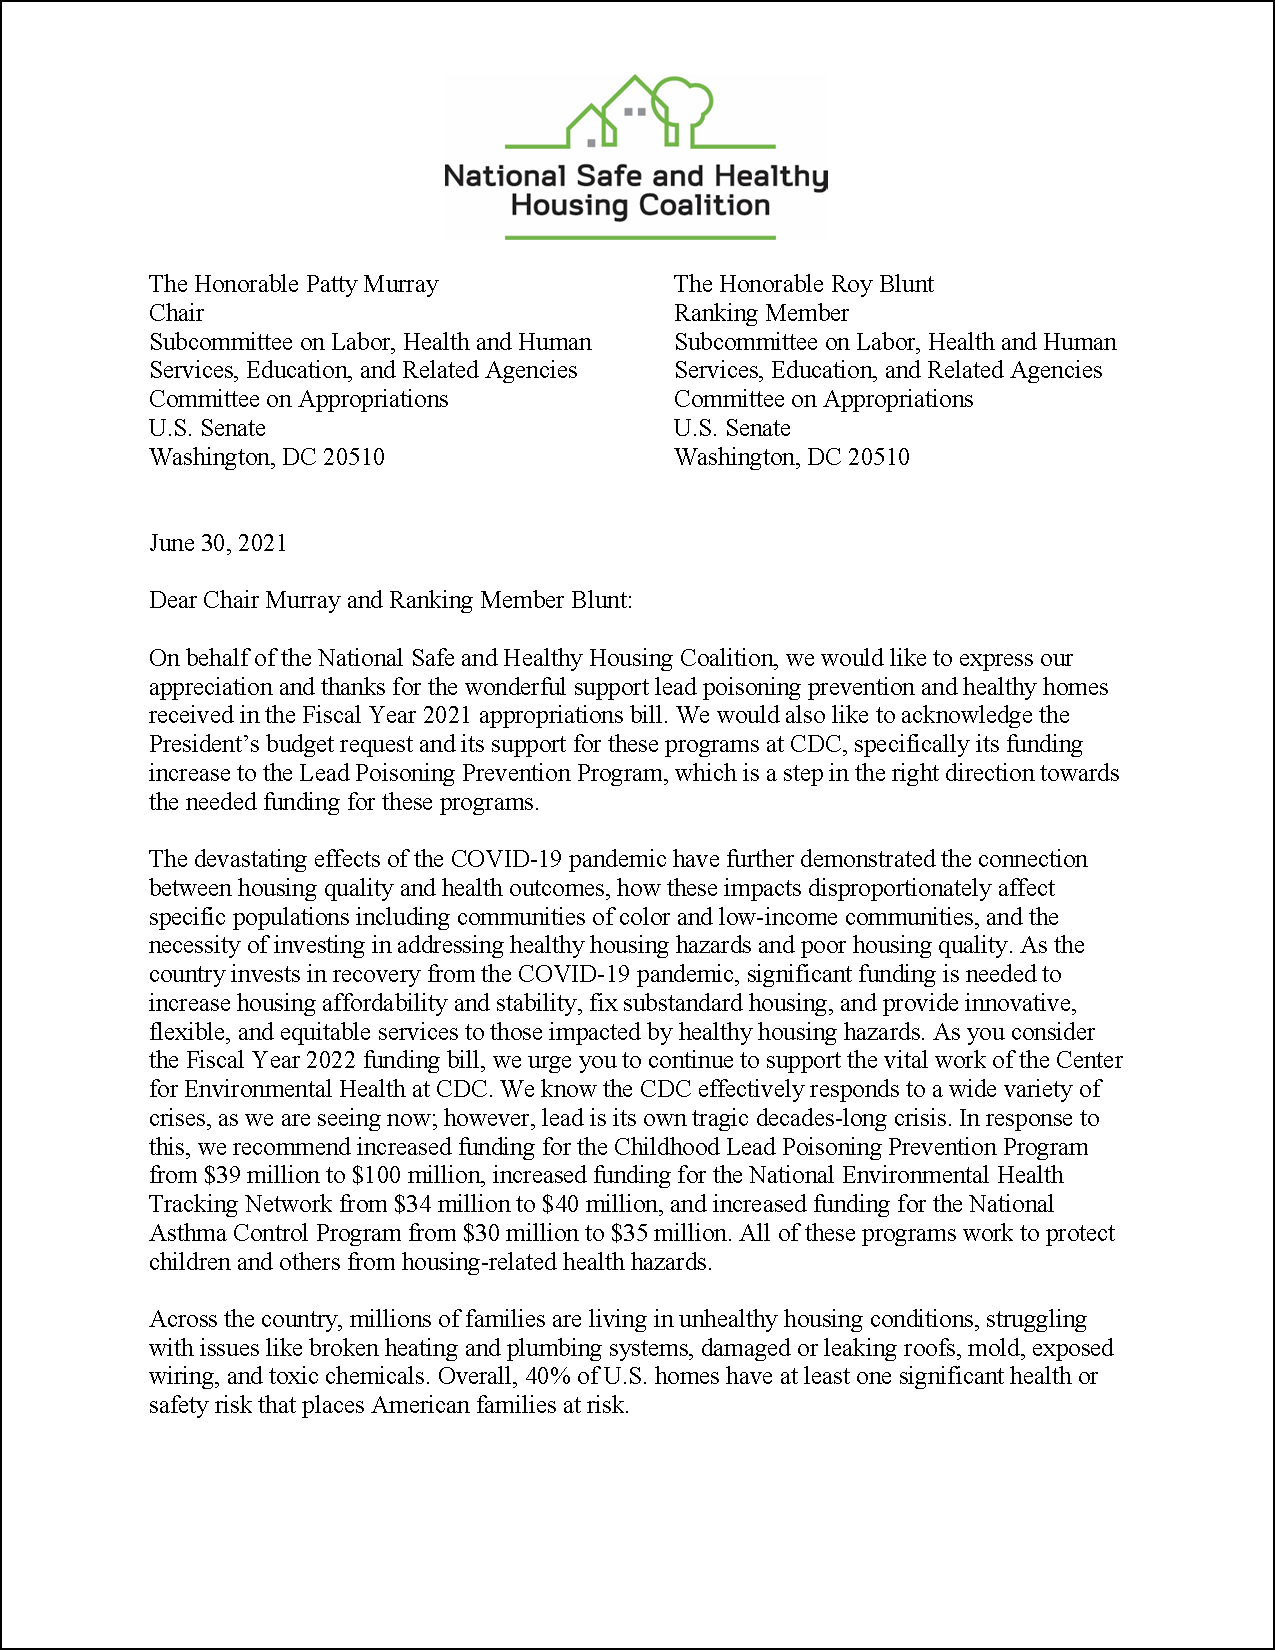 Letter: FY22 Appropriations to U.S. Senate: CDC Programs [2021.06.30] [NSHHC]